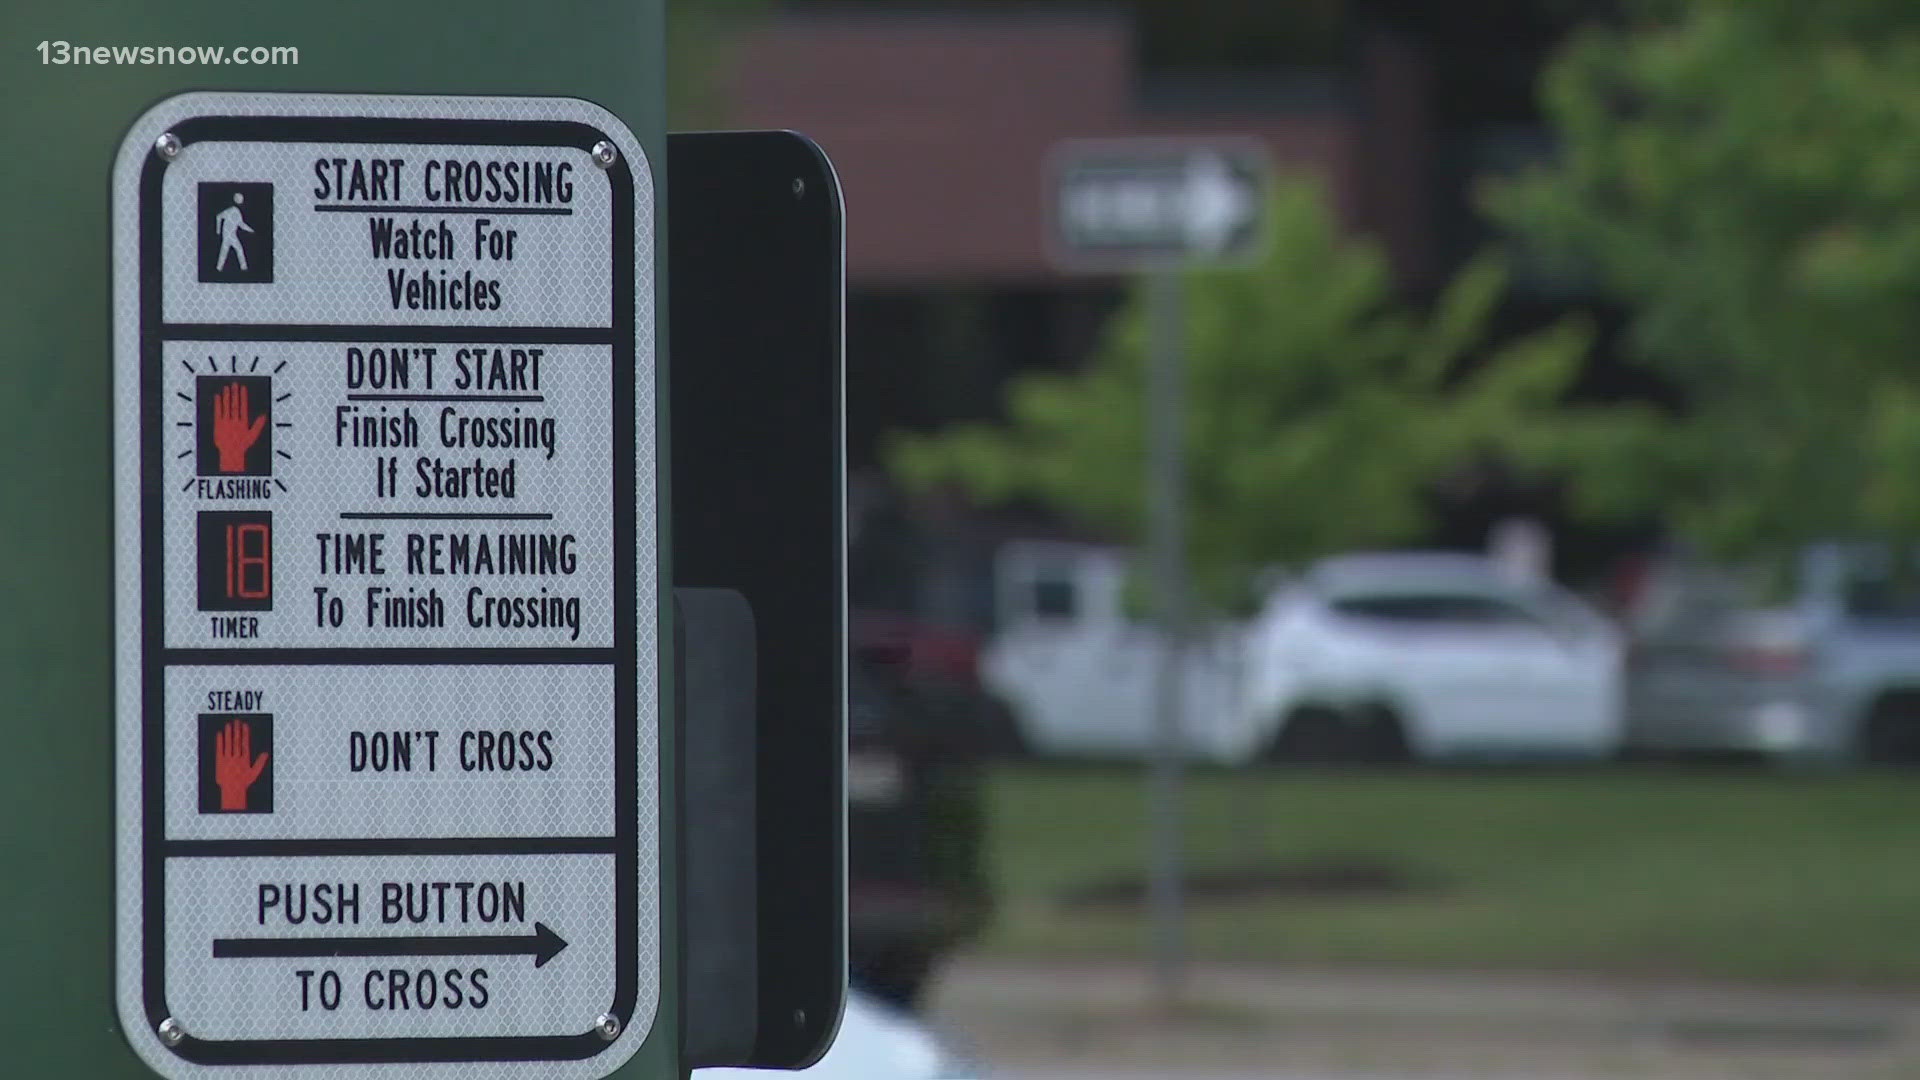 2023 marked a dangerous year for pedestrians. According to the Virginia DMV, more than 30 people lost their lives in pedestrian-related crashes.